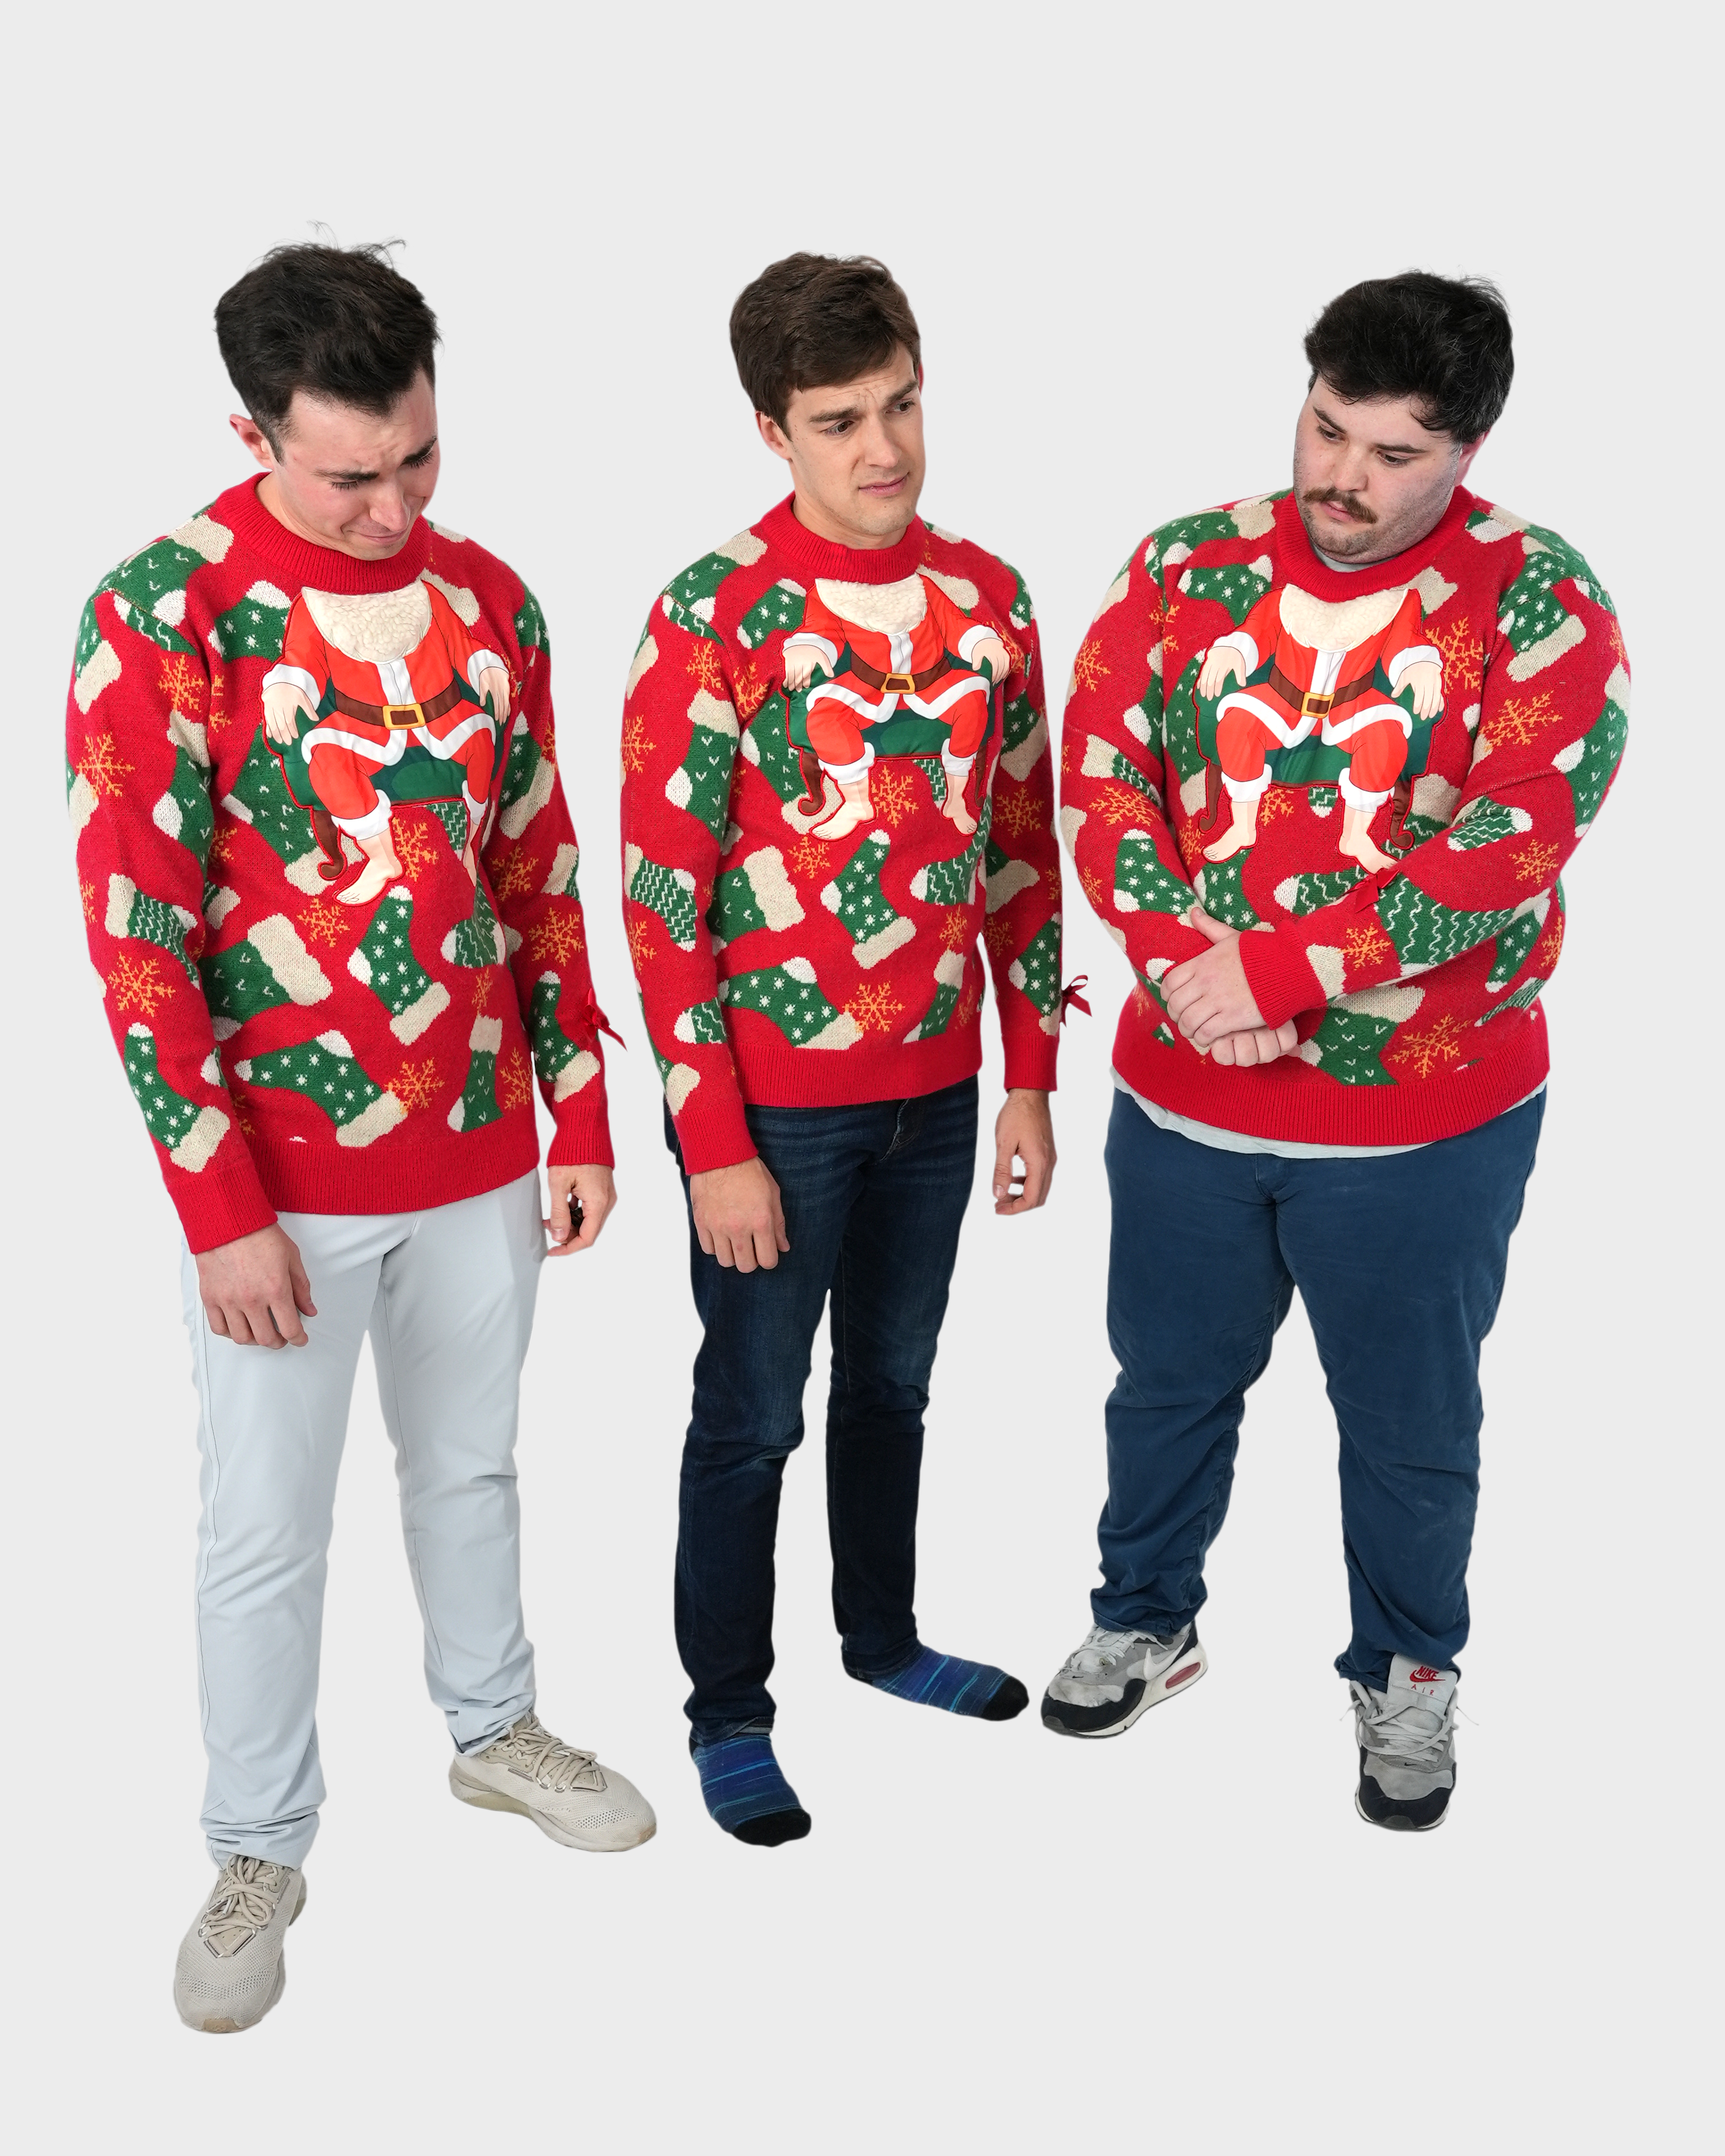 The Scientifically Ugliest Christmas Sweater 2023